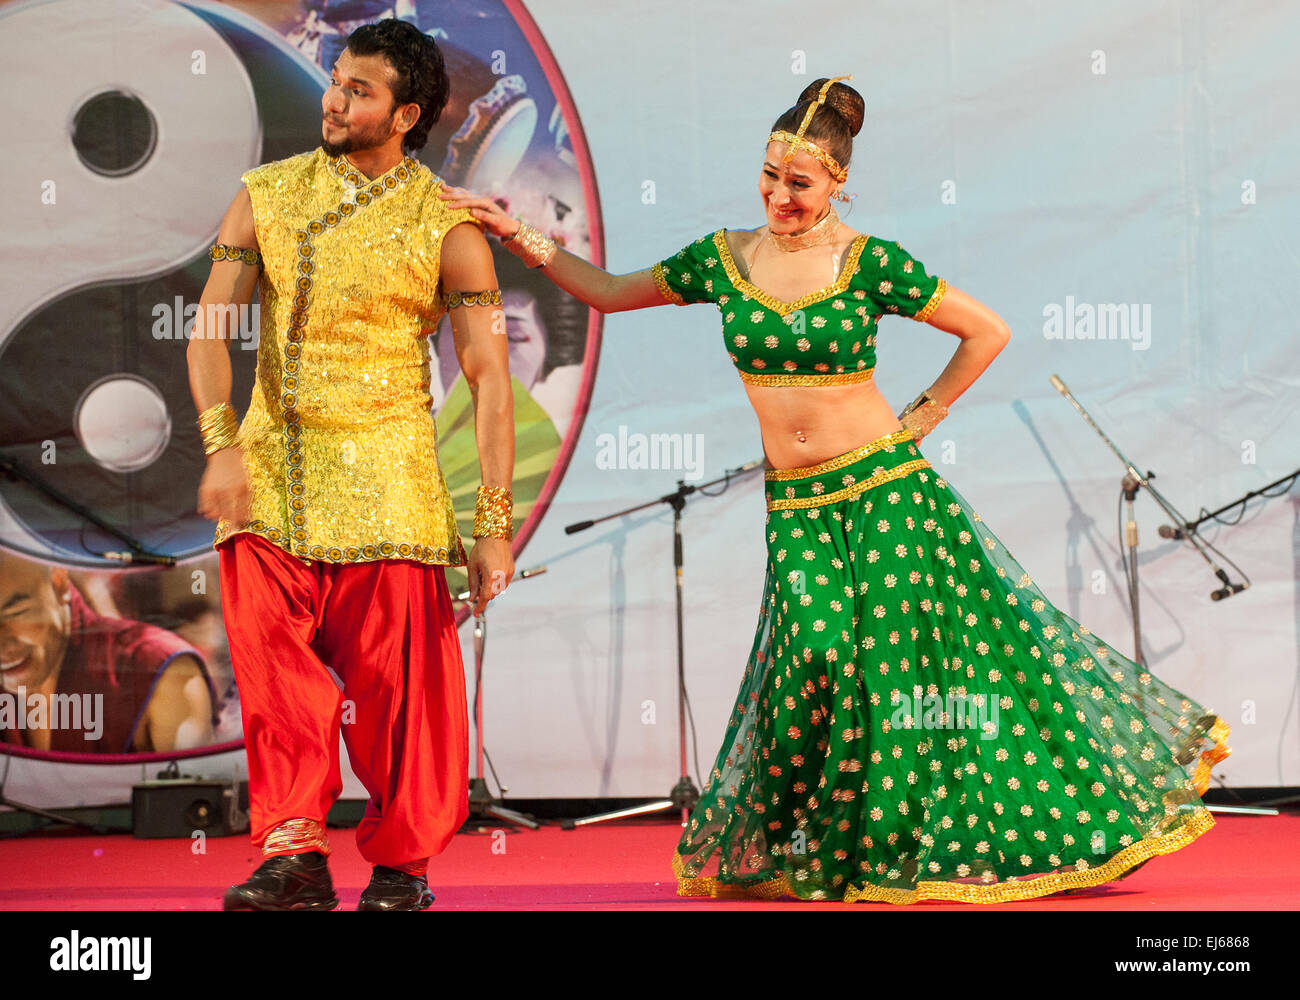 Turin, Italy. 22nd March, 2015. Lingotto fair 'Festival dell'Oriente' from 20th to 22th March 2015 and from 27th to 30th March 2015 - 20th March 2015 India Sunny Singh Bollywood Dance Company Credit:  Realy Easy Star/Alamy Live News Stock Photo